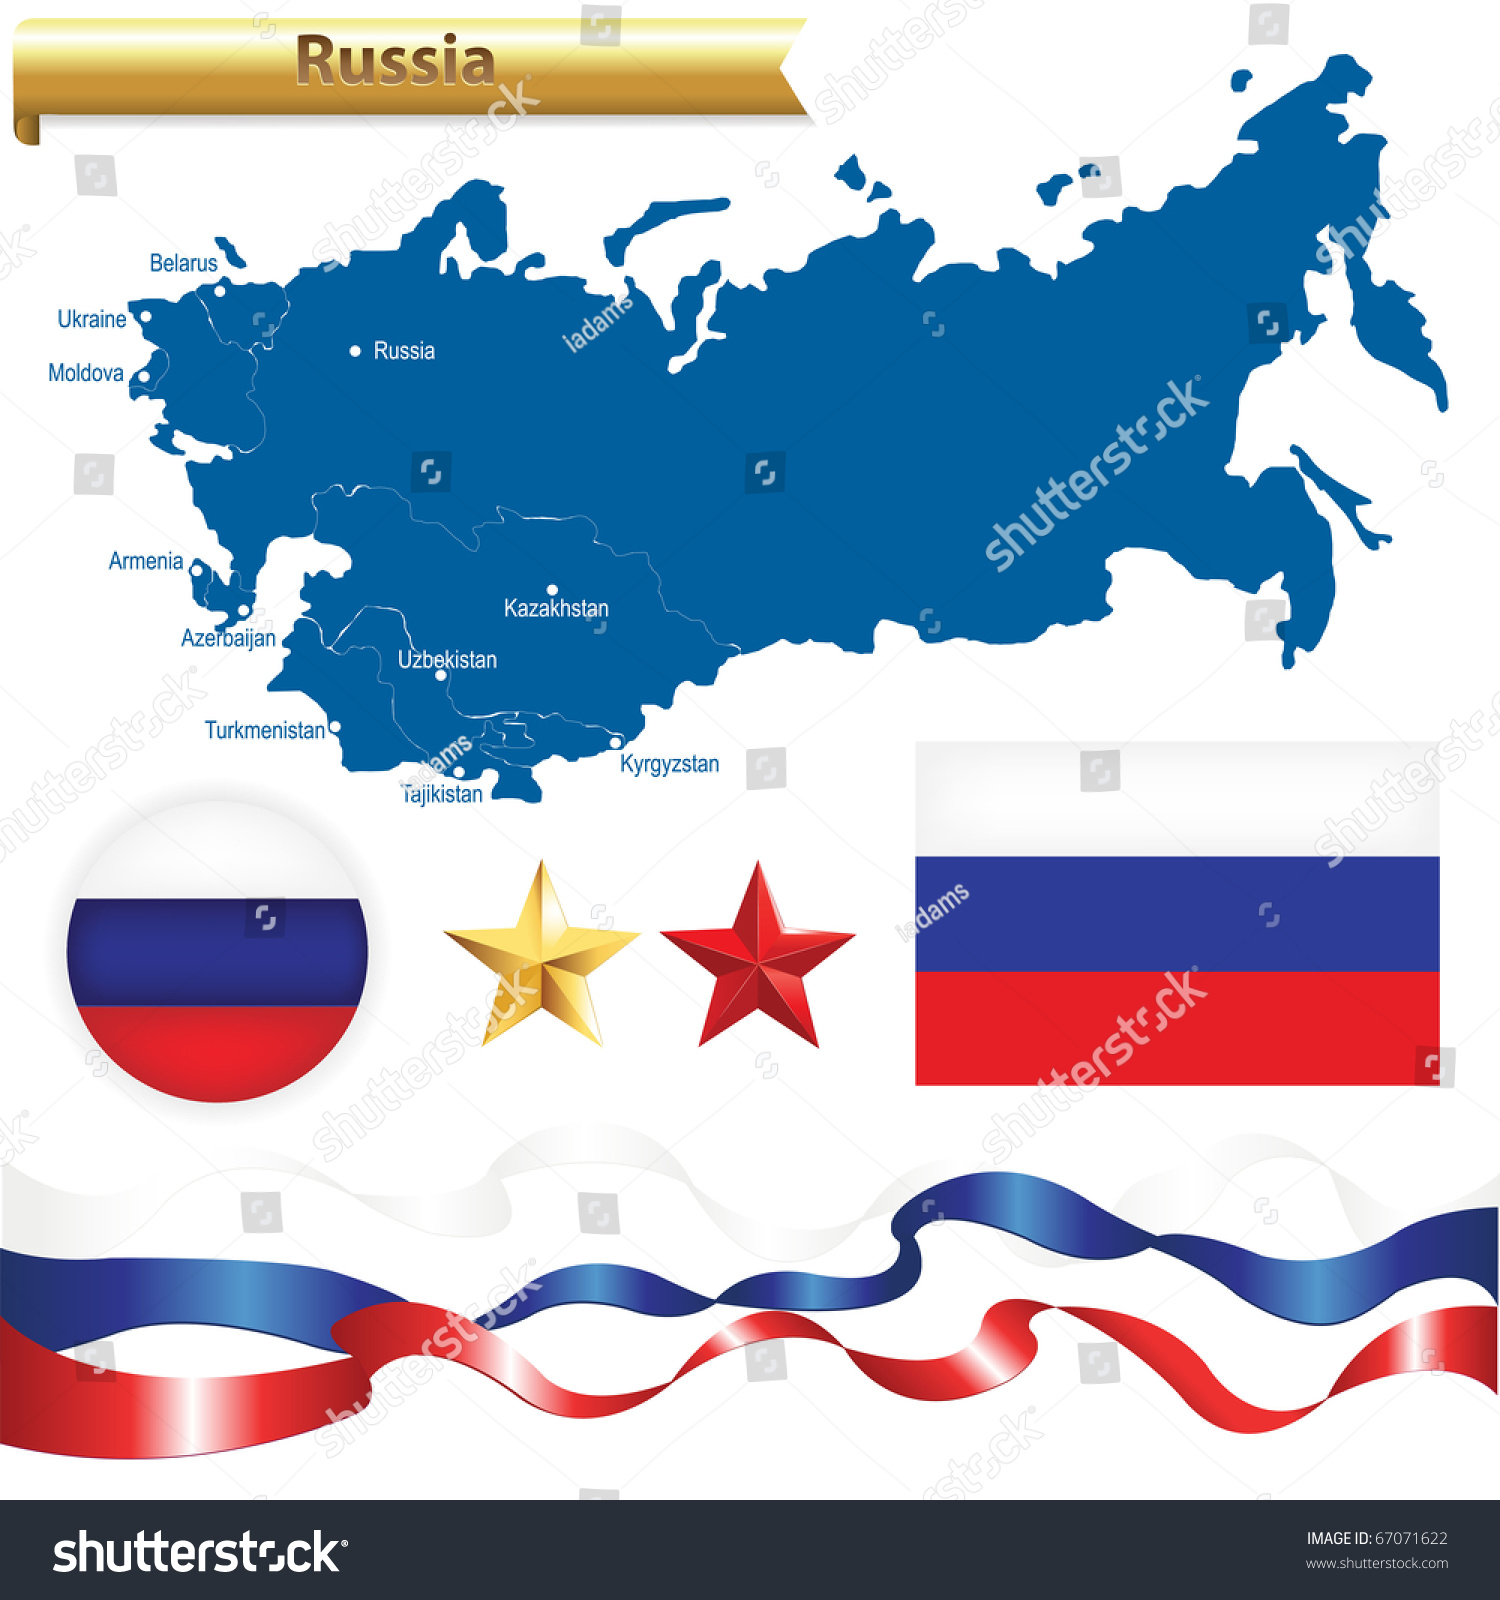 clipart russia map - photo #43